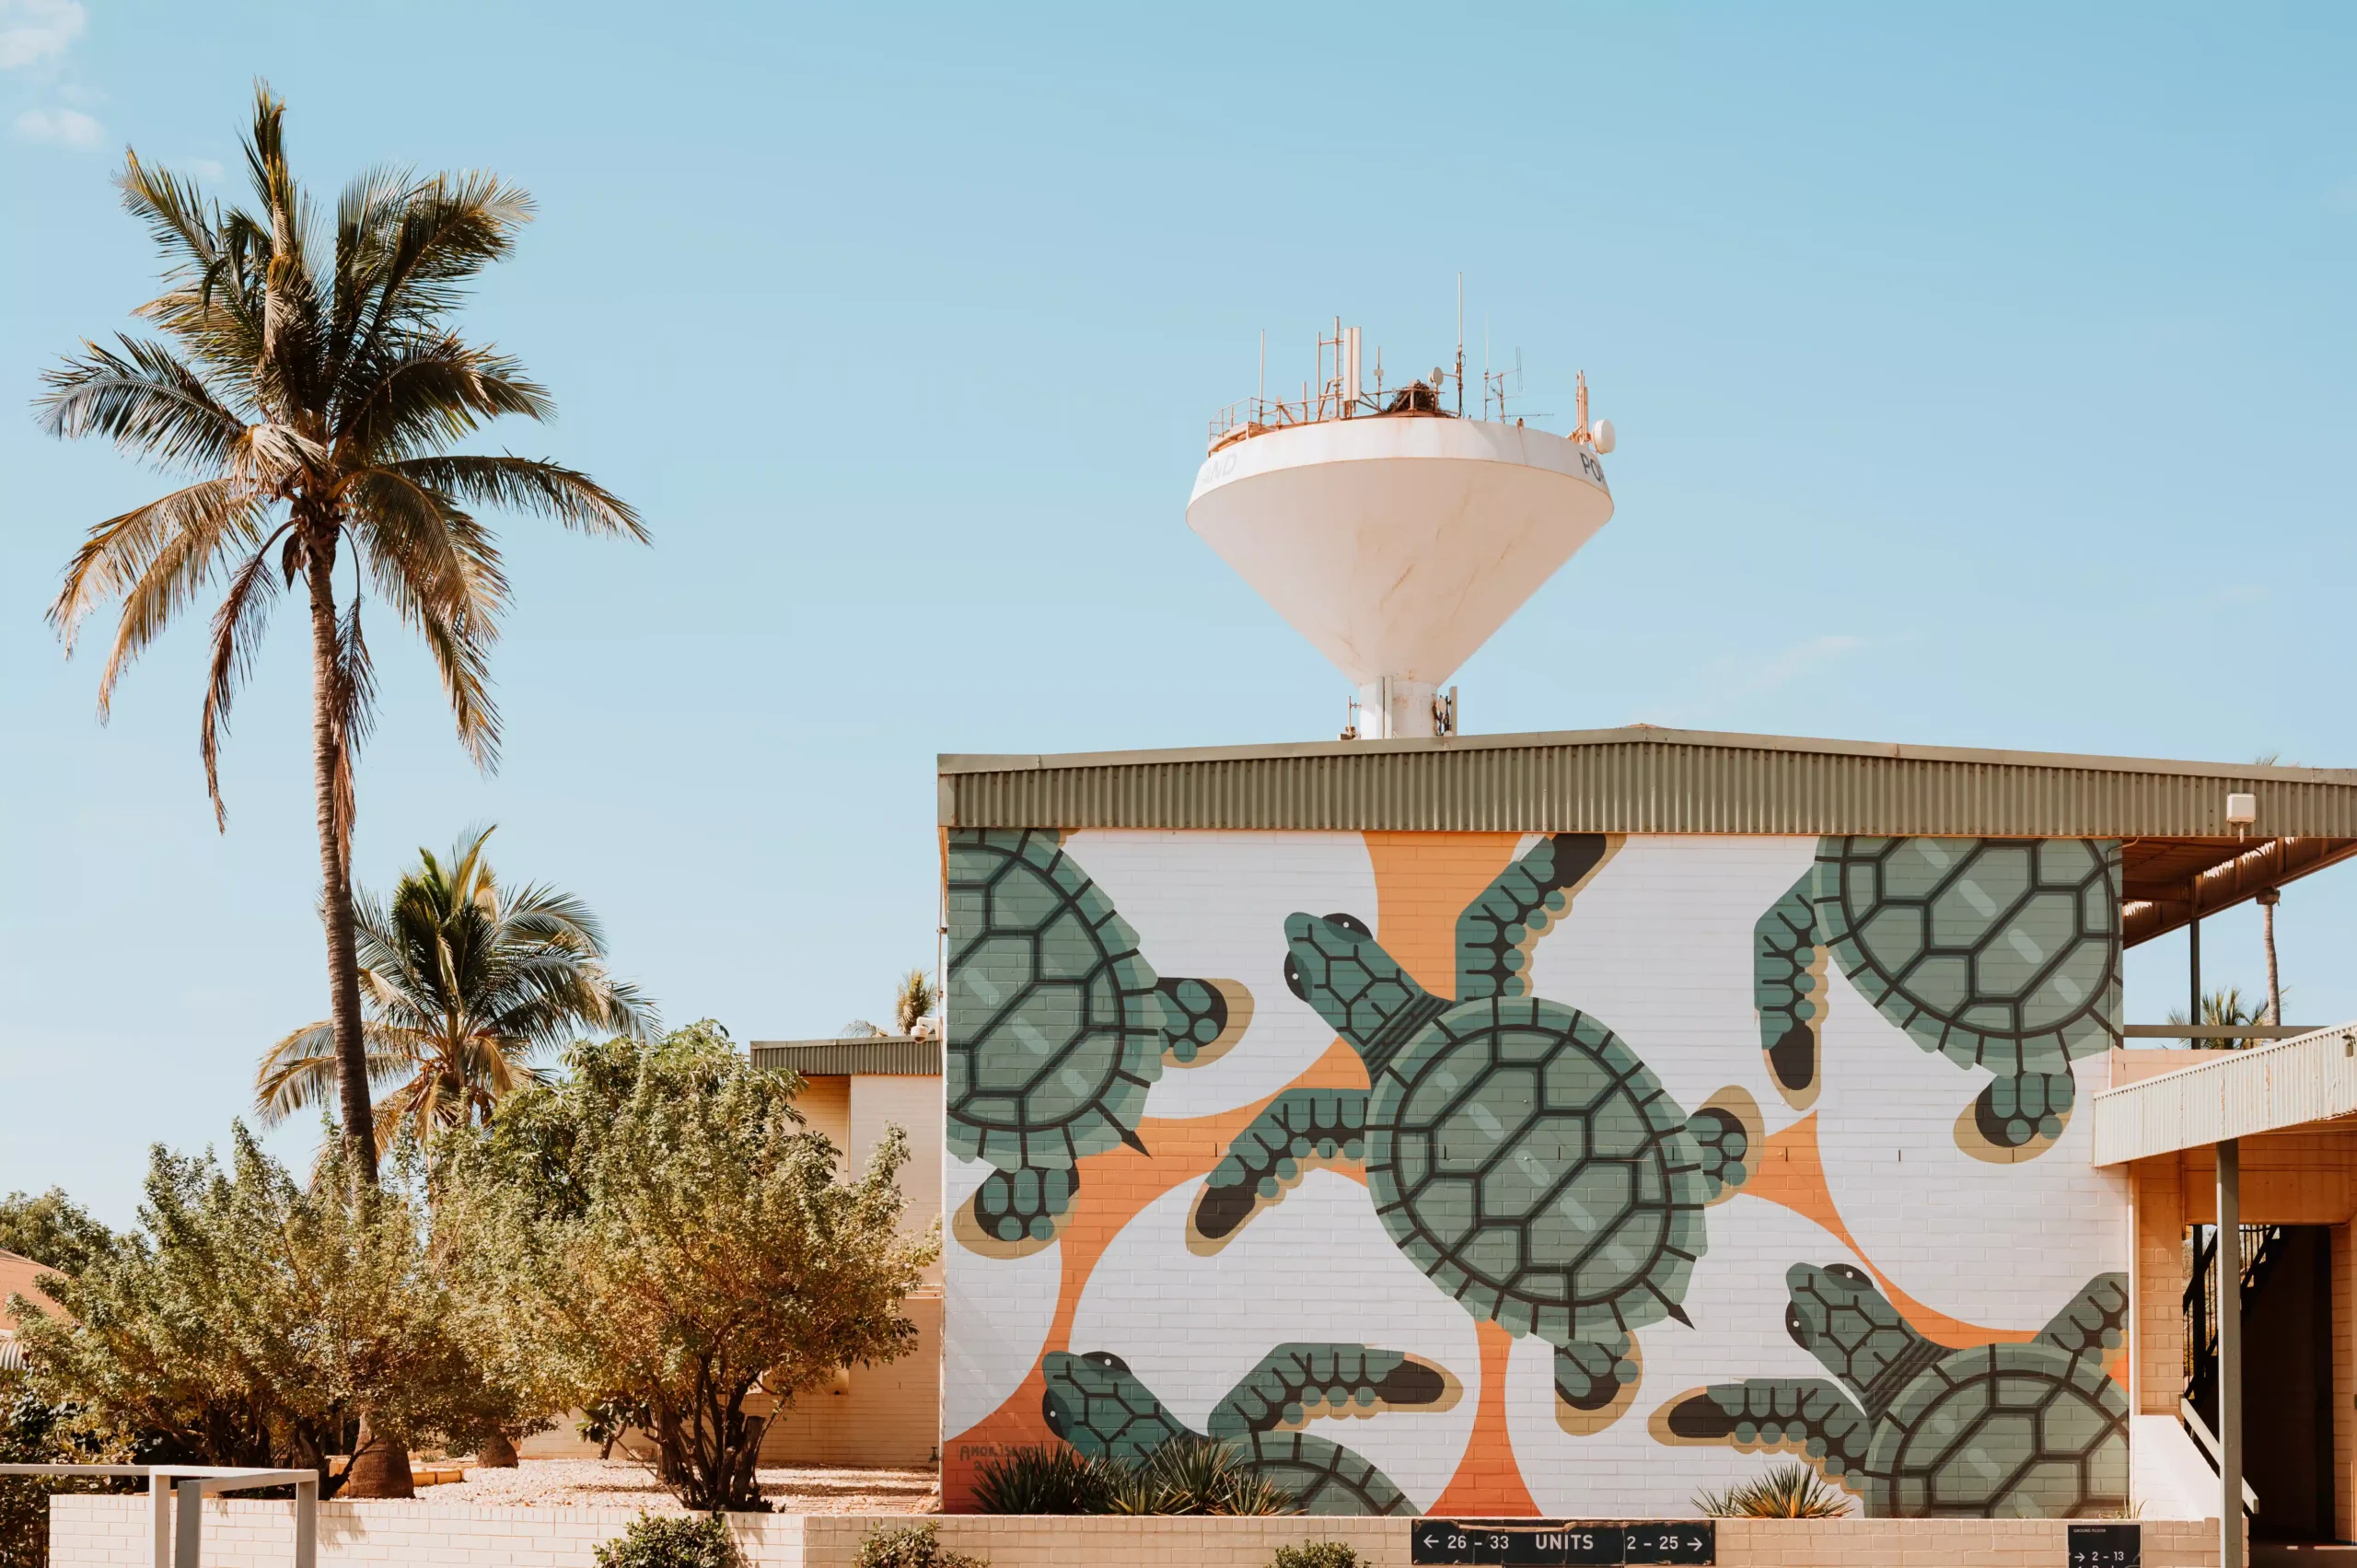 Mural of turtles at the Hedland Hotel with palm trees and blue sky in the background